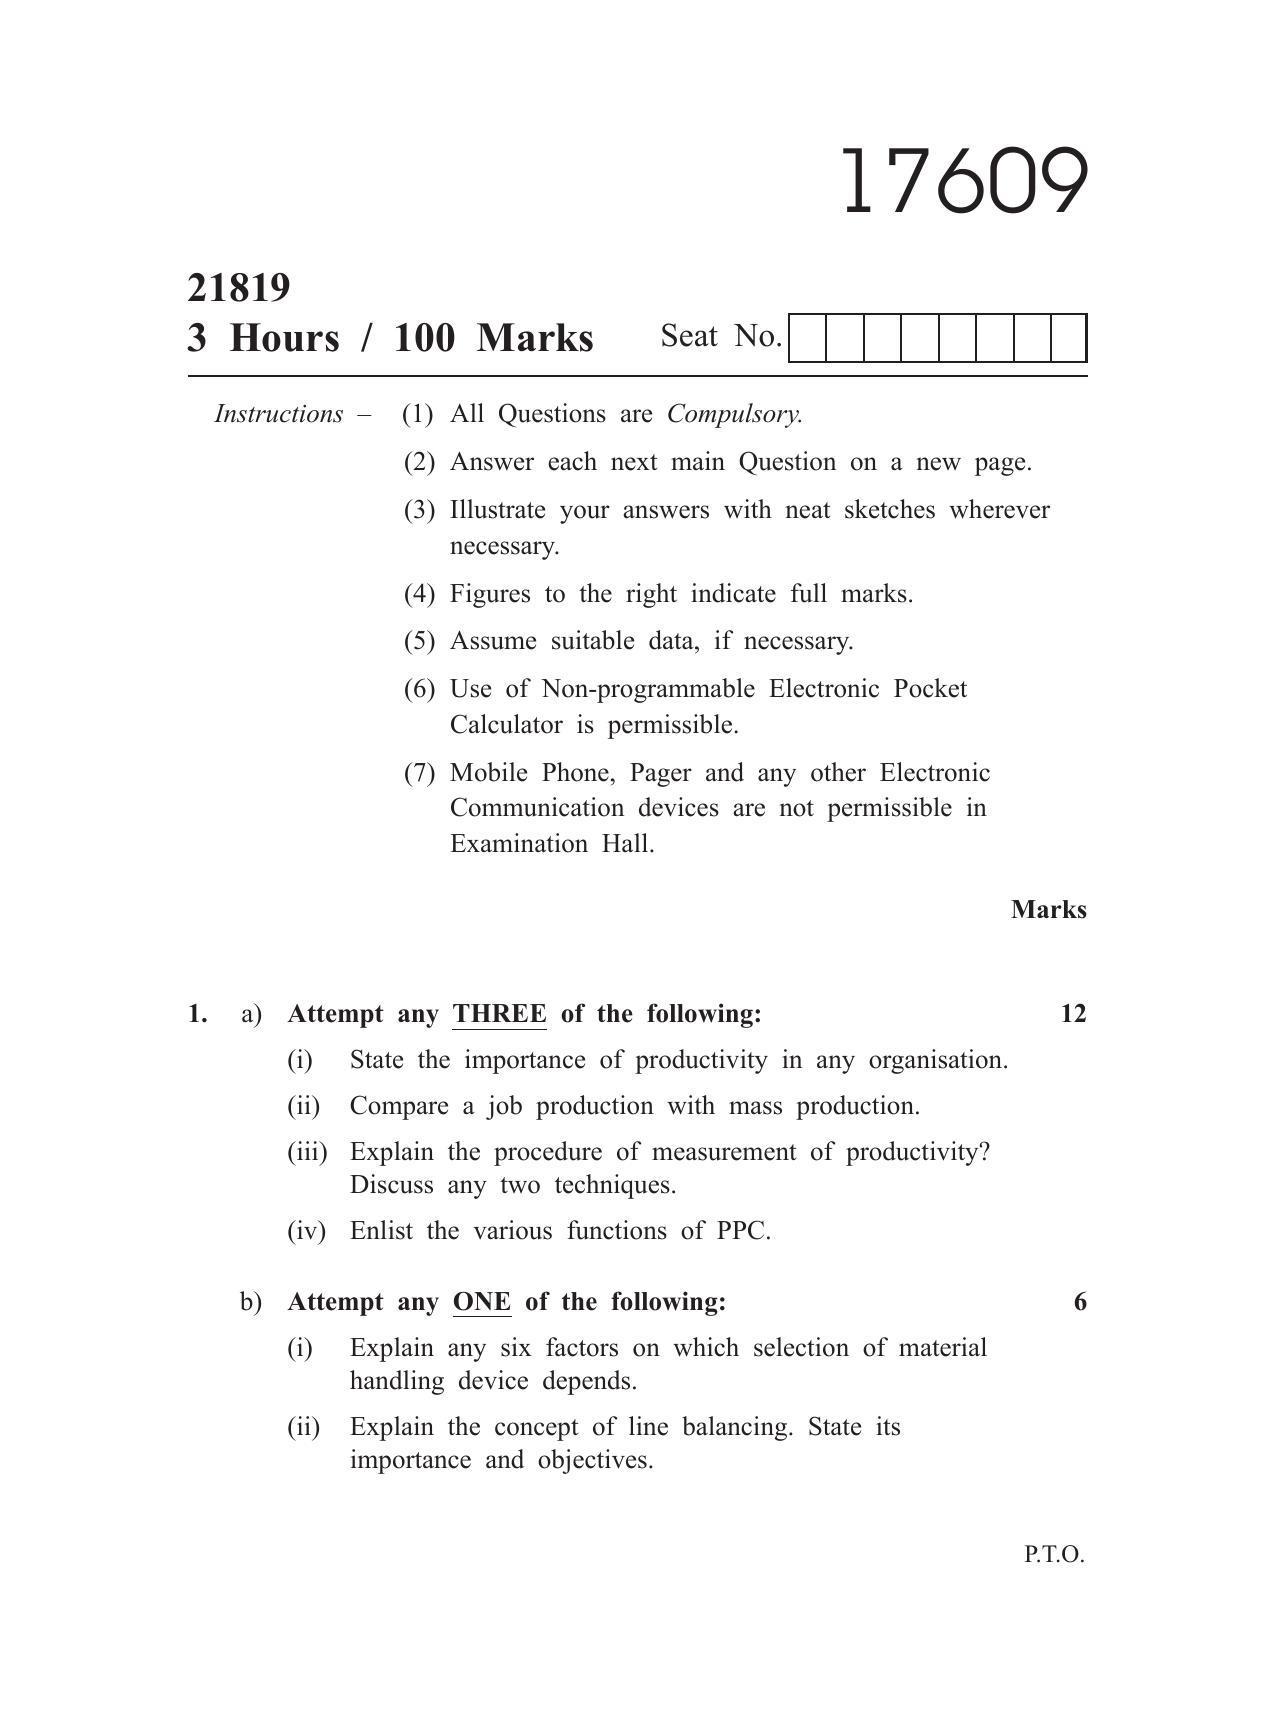 MSBTE Summer Question Paper 2019 - Production Engineering & Robotics - Page 1